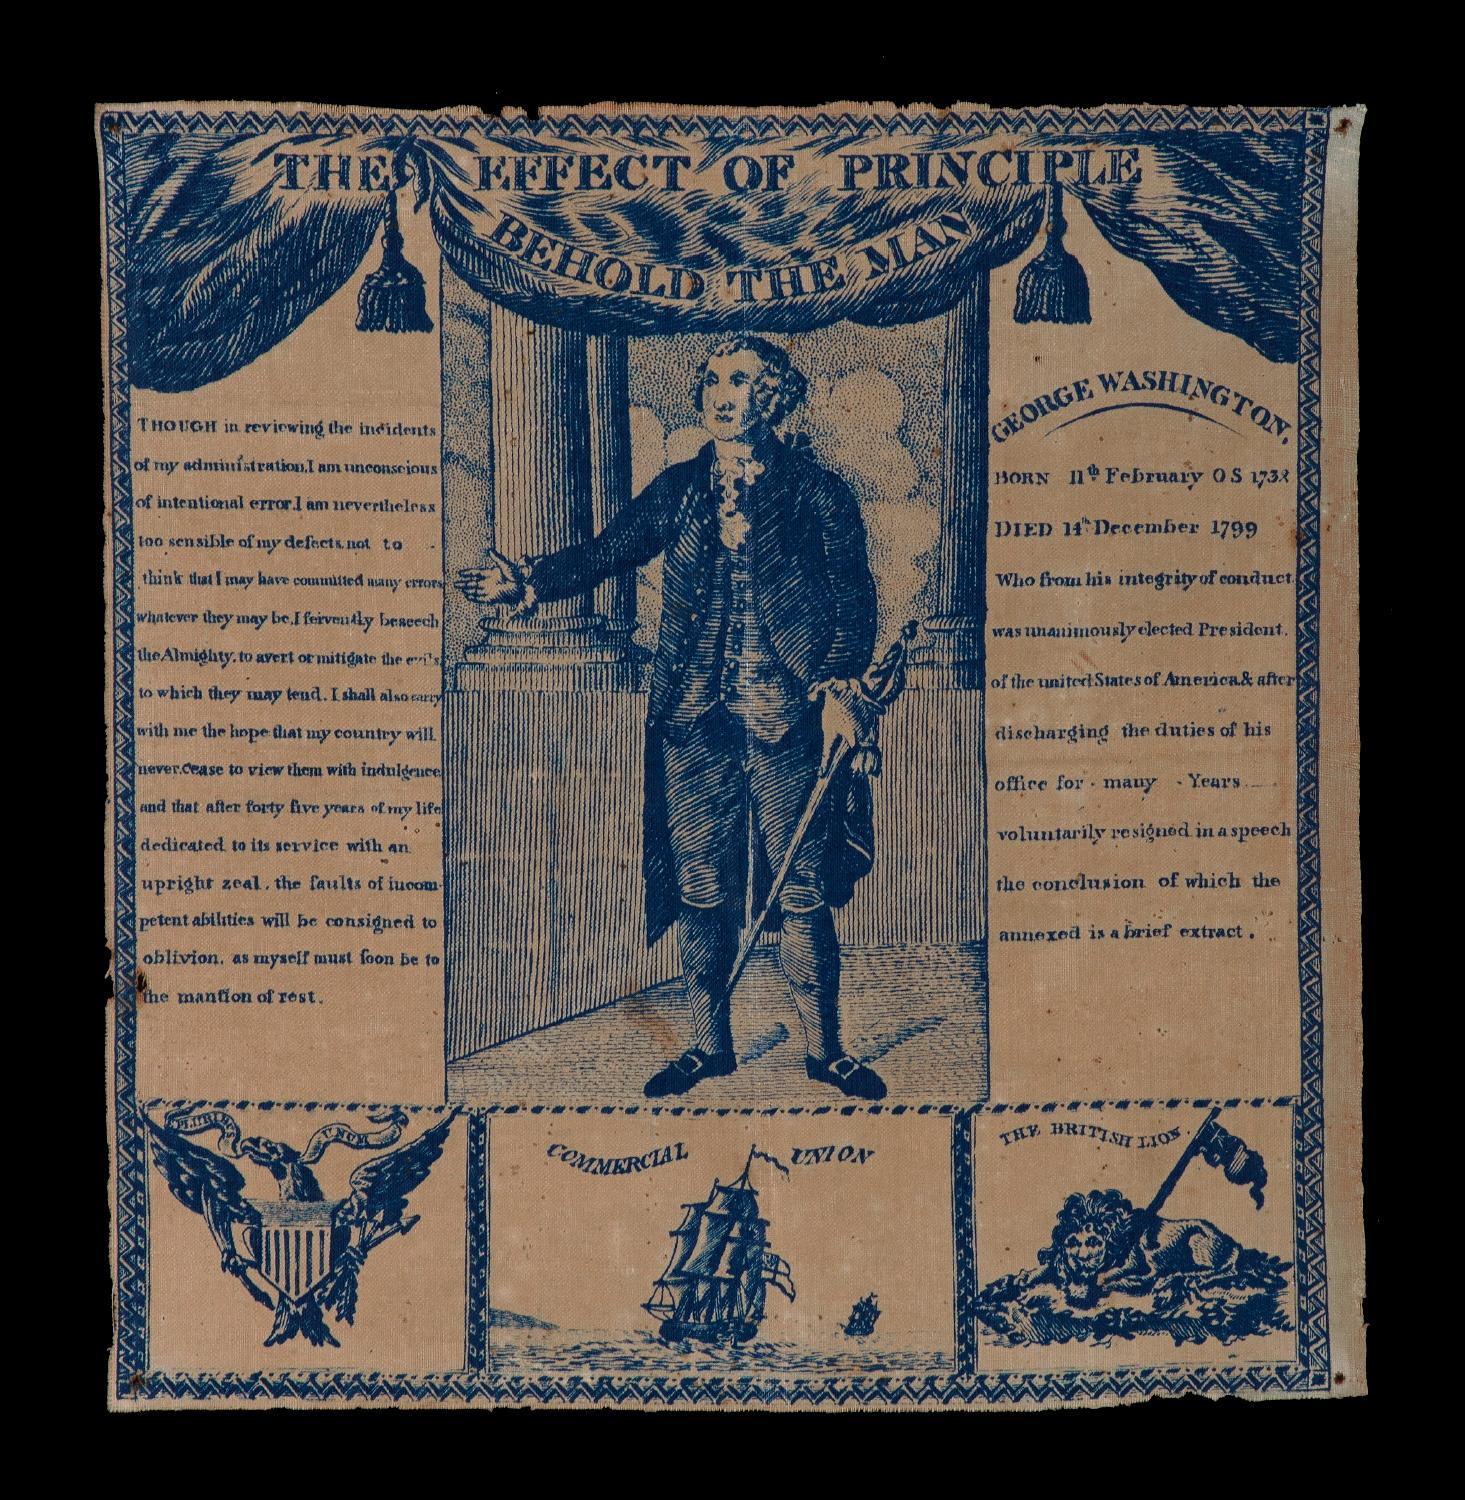 EXTRAORDINARILY EARLY (1806) PRINTED LINEN KERCHIEF GLORIFYING GEORGE WASHINGTON, PRINT WORKS, GERMANTOWN, PENNSYLVANIA 

Printed in blue ink on coarse, white linen, this patriotic kerchief shows a standing portrait of George Washington, above which